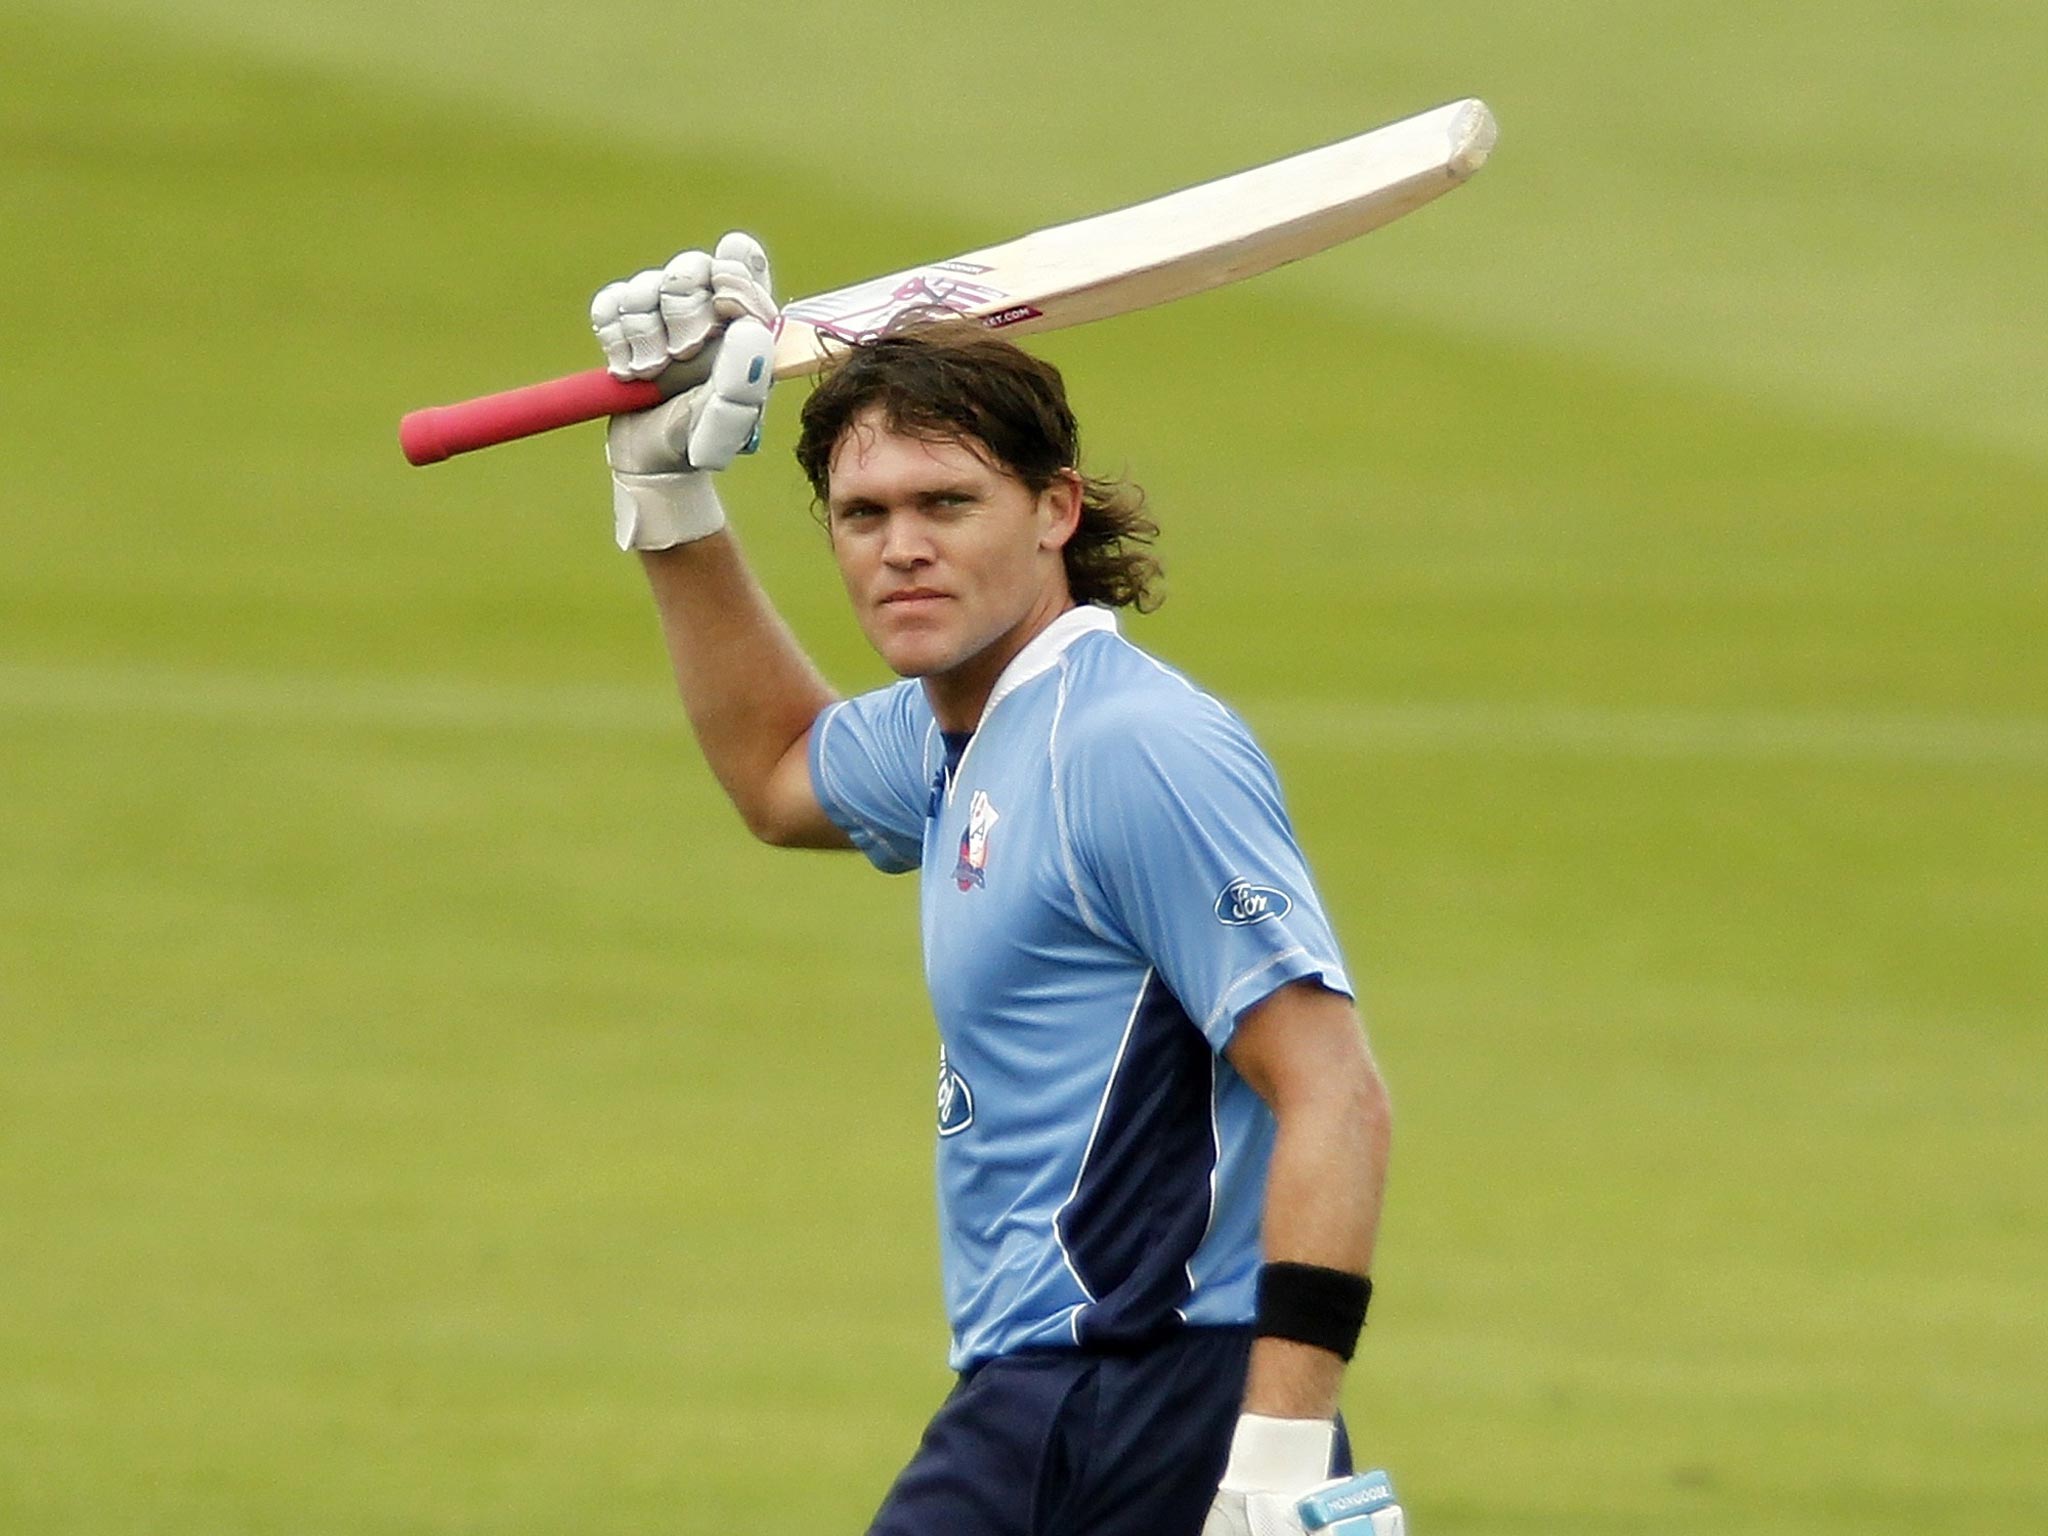 Lou Vincent, the former New Zealand Test player, is said to have told how matches were rigged